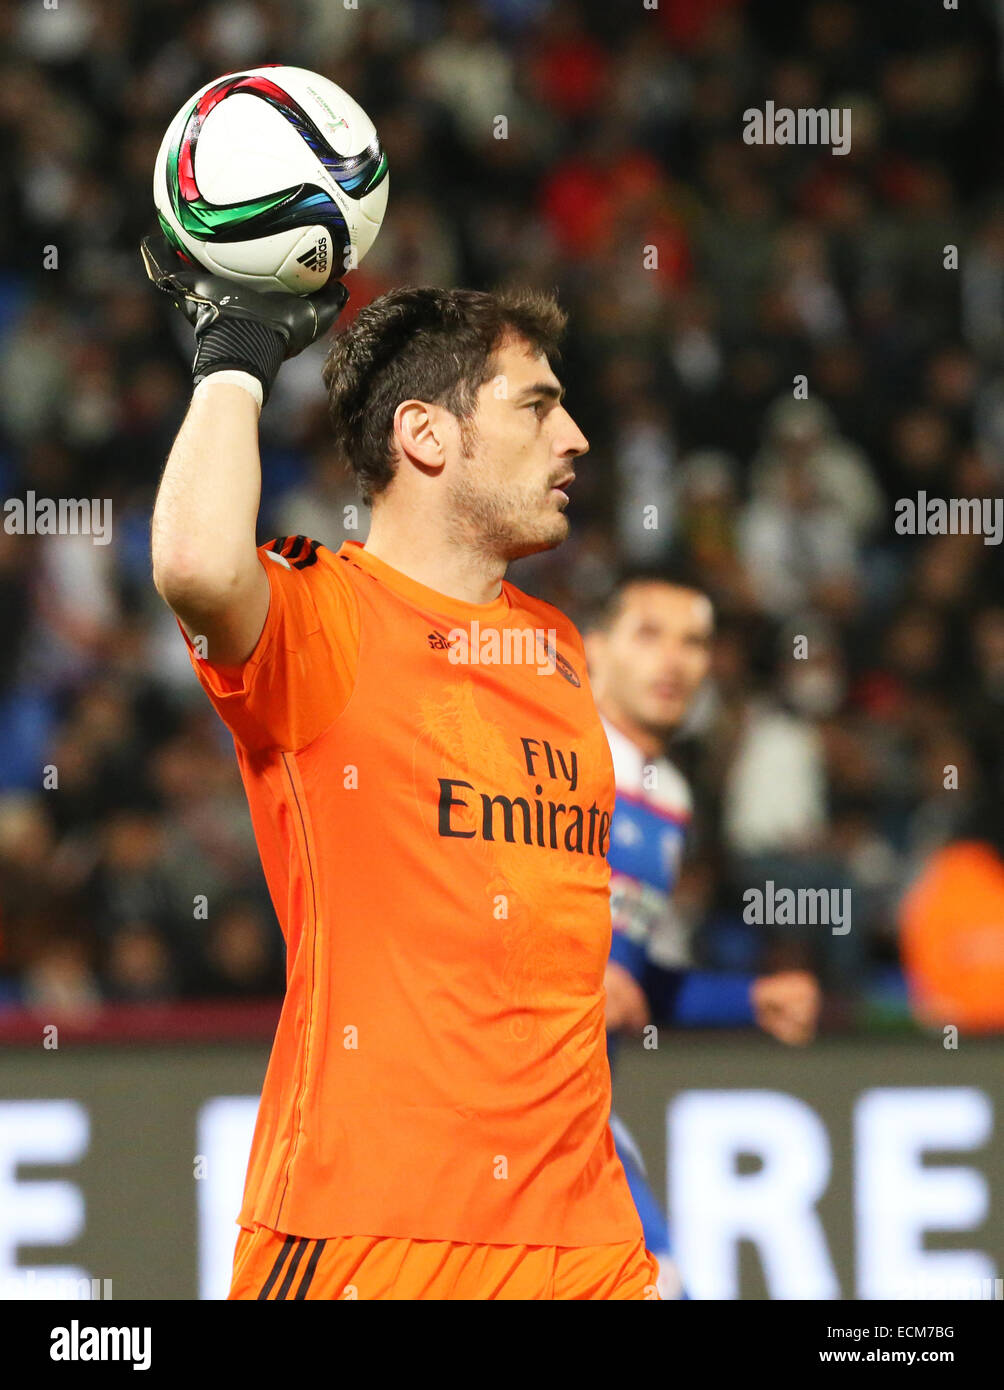 Marrakesh, Morocco. 16th Dec, 2014. FIFA World Club Cup. Cruz Azul versus Real Madrid. Real Madrid goalkeeper Iker Casillas (1) with the ball about to clear upfield. Credit:  Action Plus Sports/Alamy Live News Stock Photo